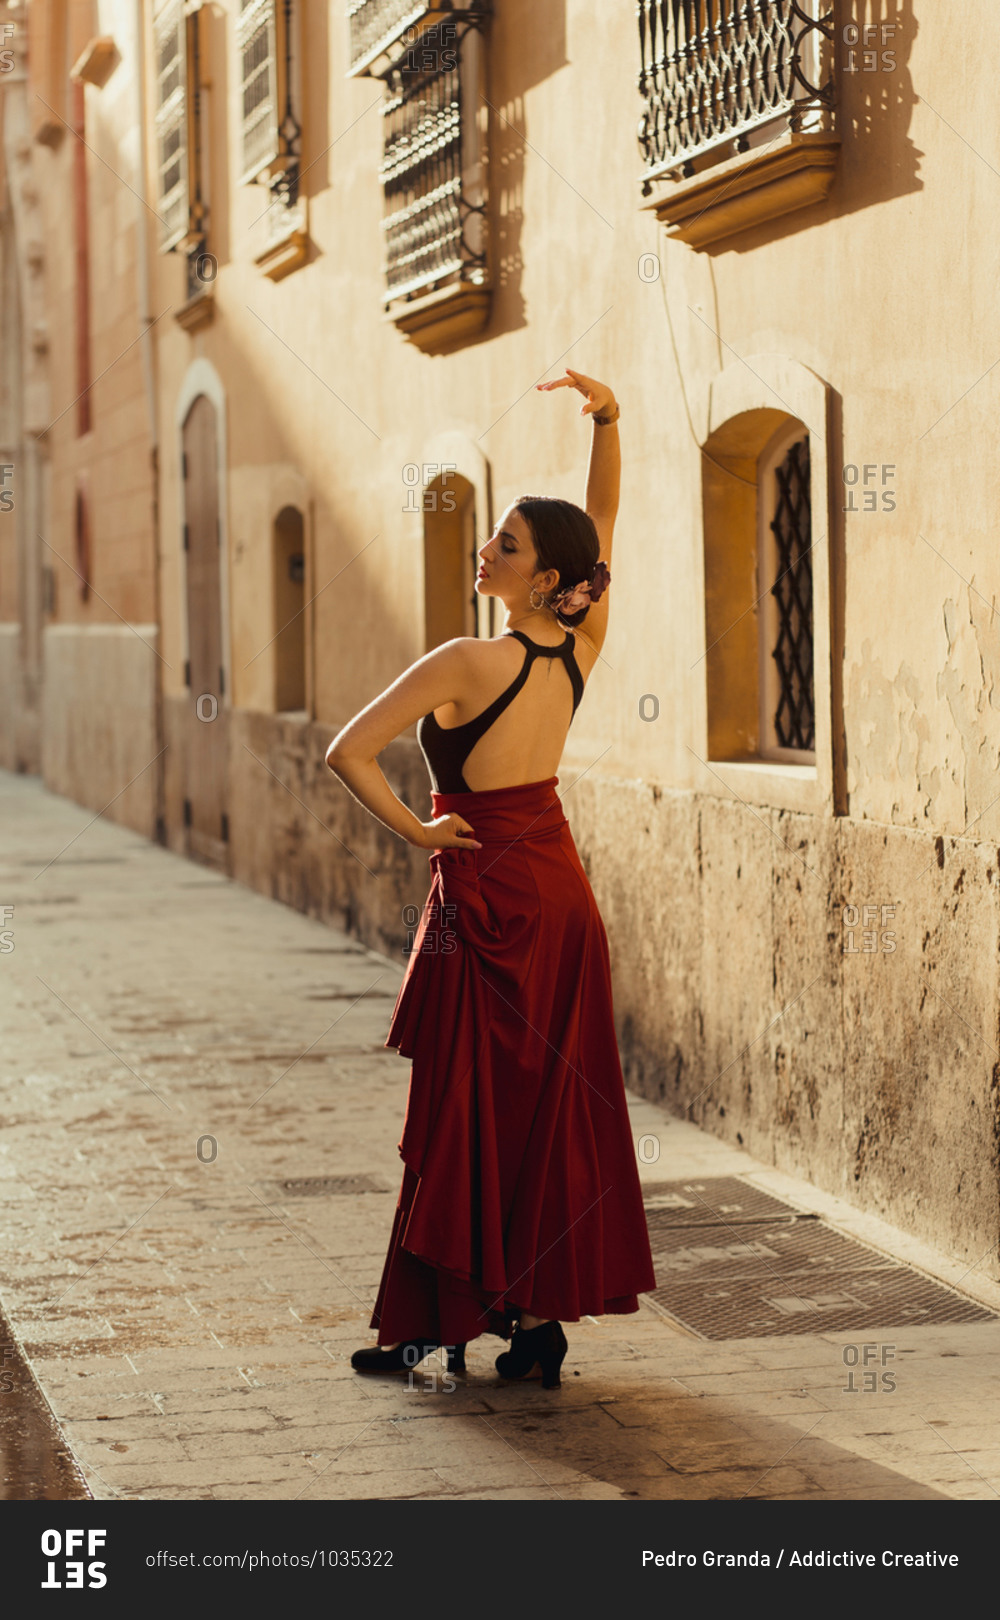 Full body back view of young Hispanic female dancer in traditional outfit performing Flamenco dance on old street with aged stone buildings